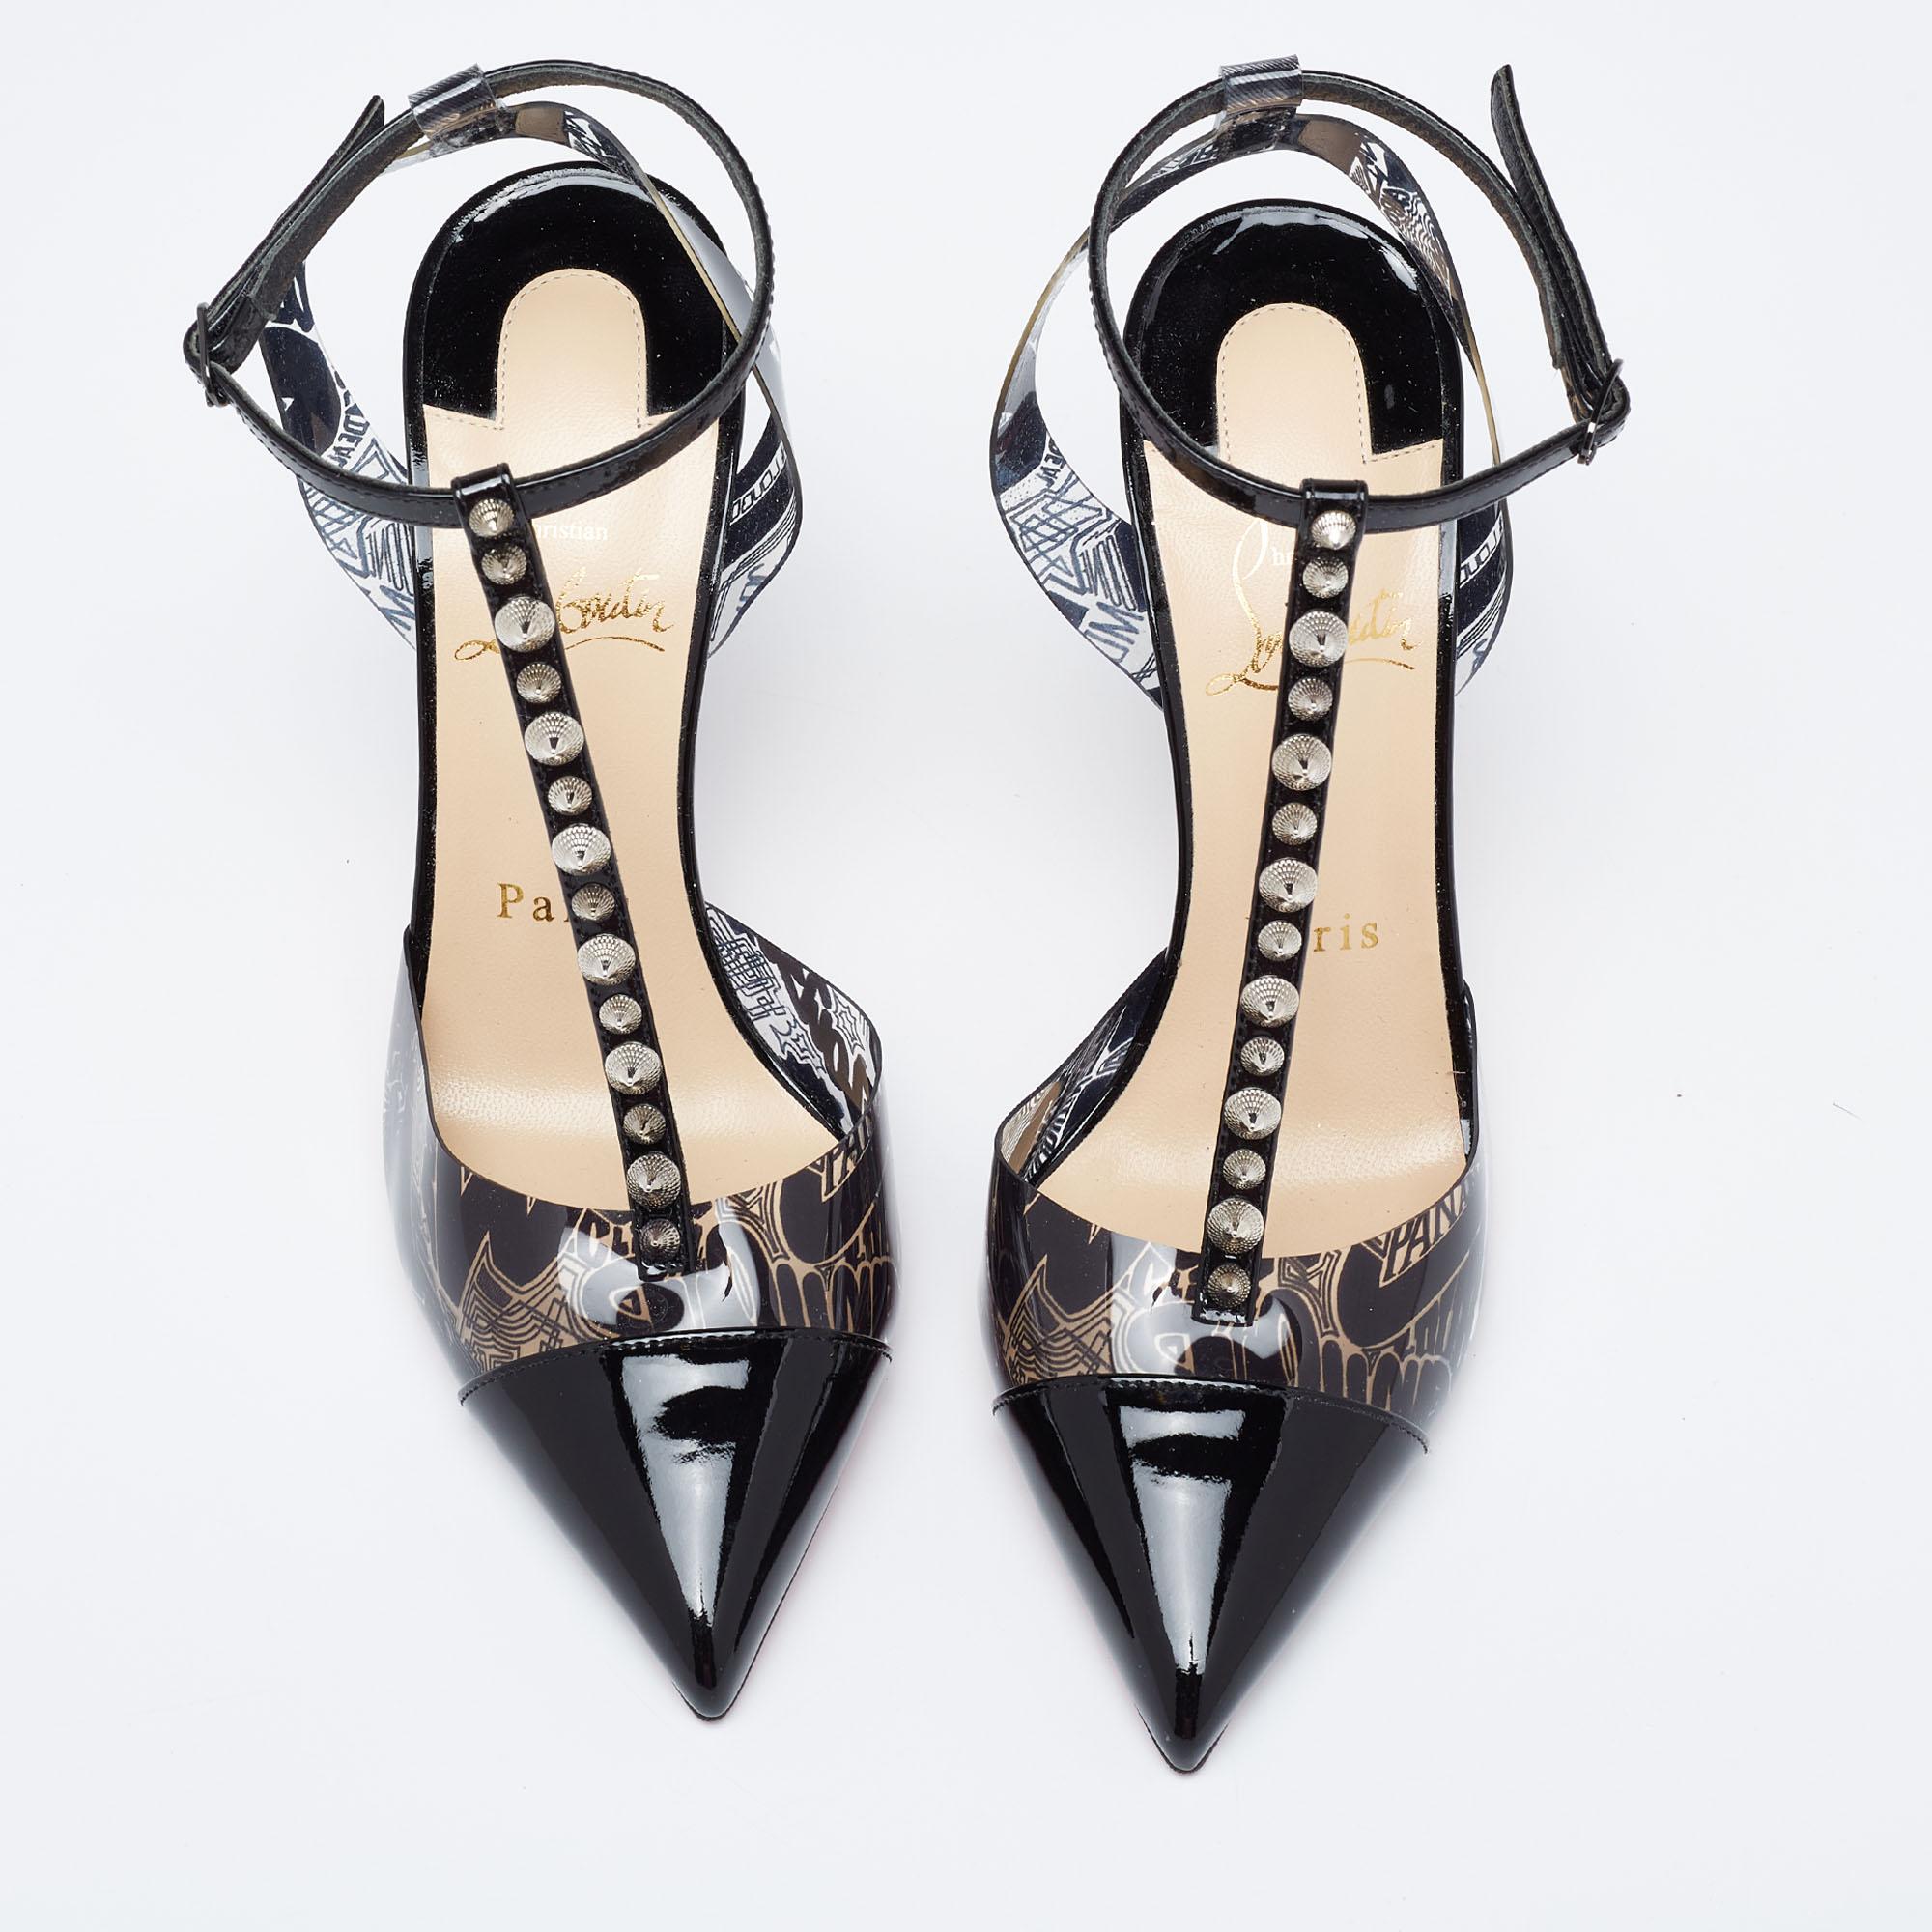 The usage of graffiti printed PVC in these Christian Louboutin sandals celebrates and showcases appreciation of street art. Also made from patent leather, the T-strap of the pair is decorated with silver-tone spikes and these shoes are elevated on